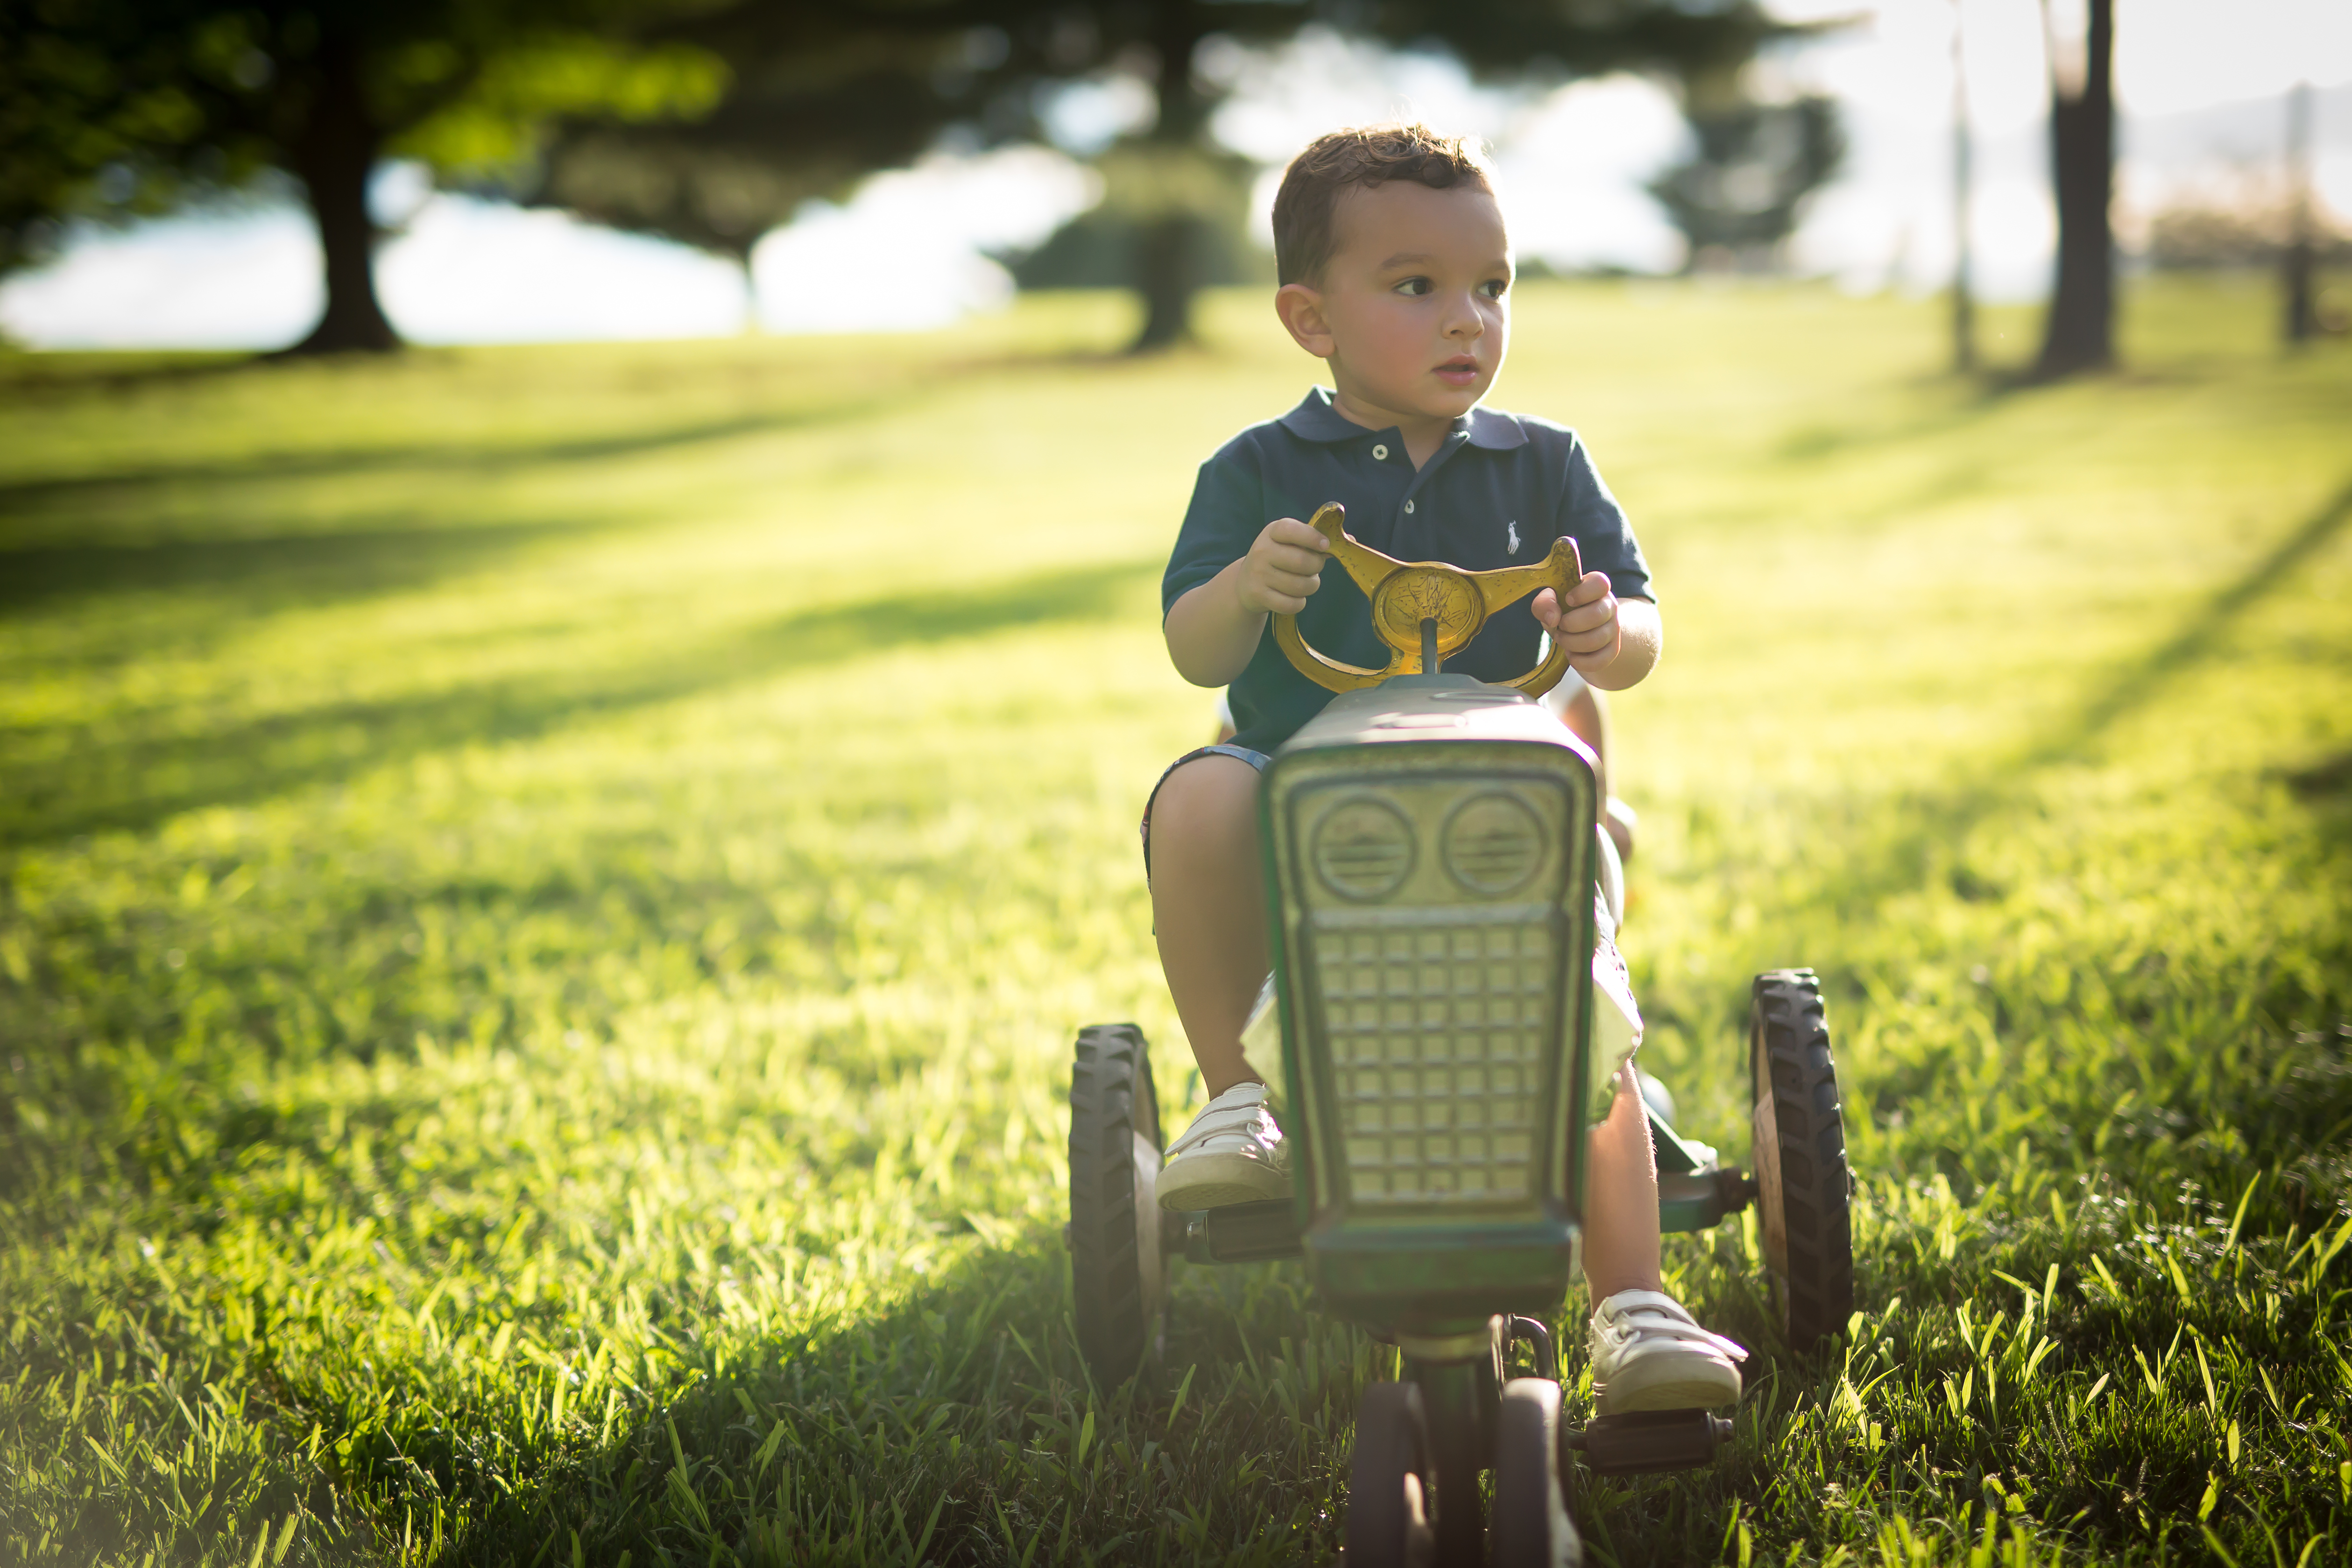 what time of day is best for your photo shoot? Little boy on a toy tractor, on a grassy hill. Late afternoon sun is streaming down on the grass.